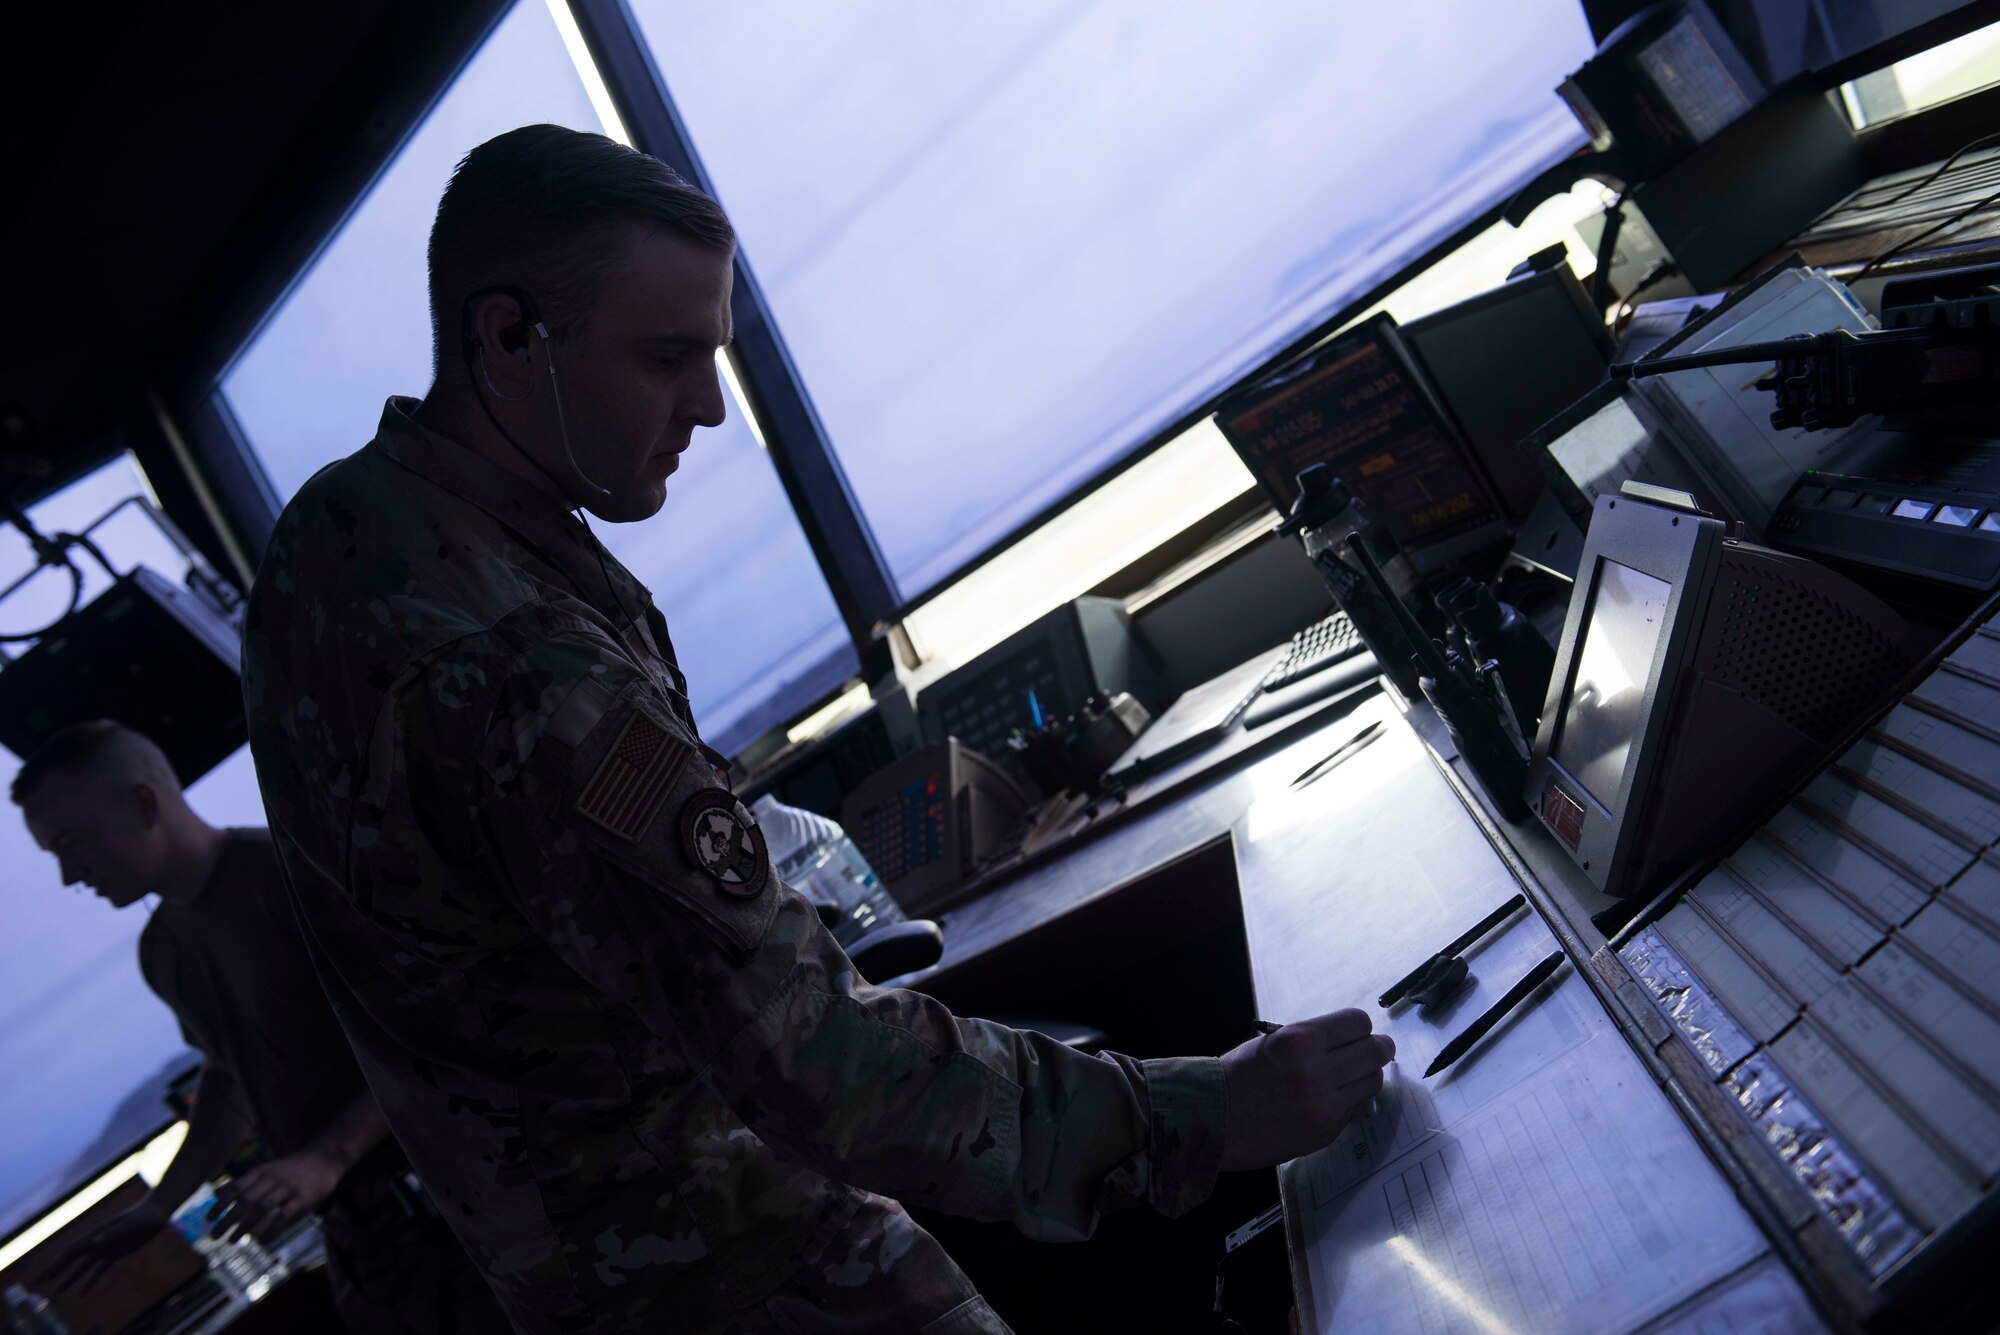 A photo of an Airman writing down information